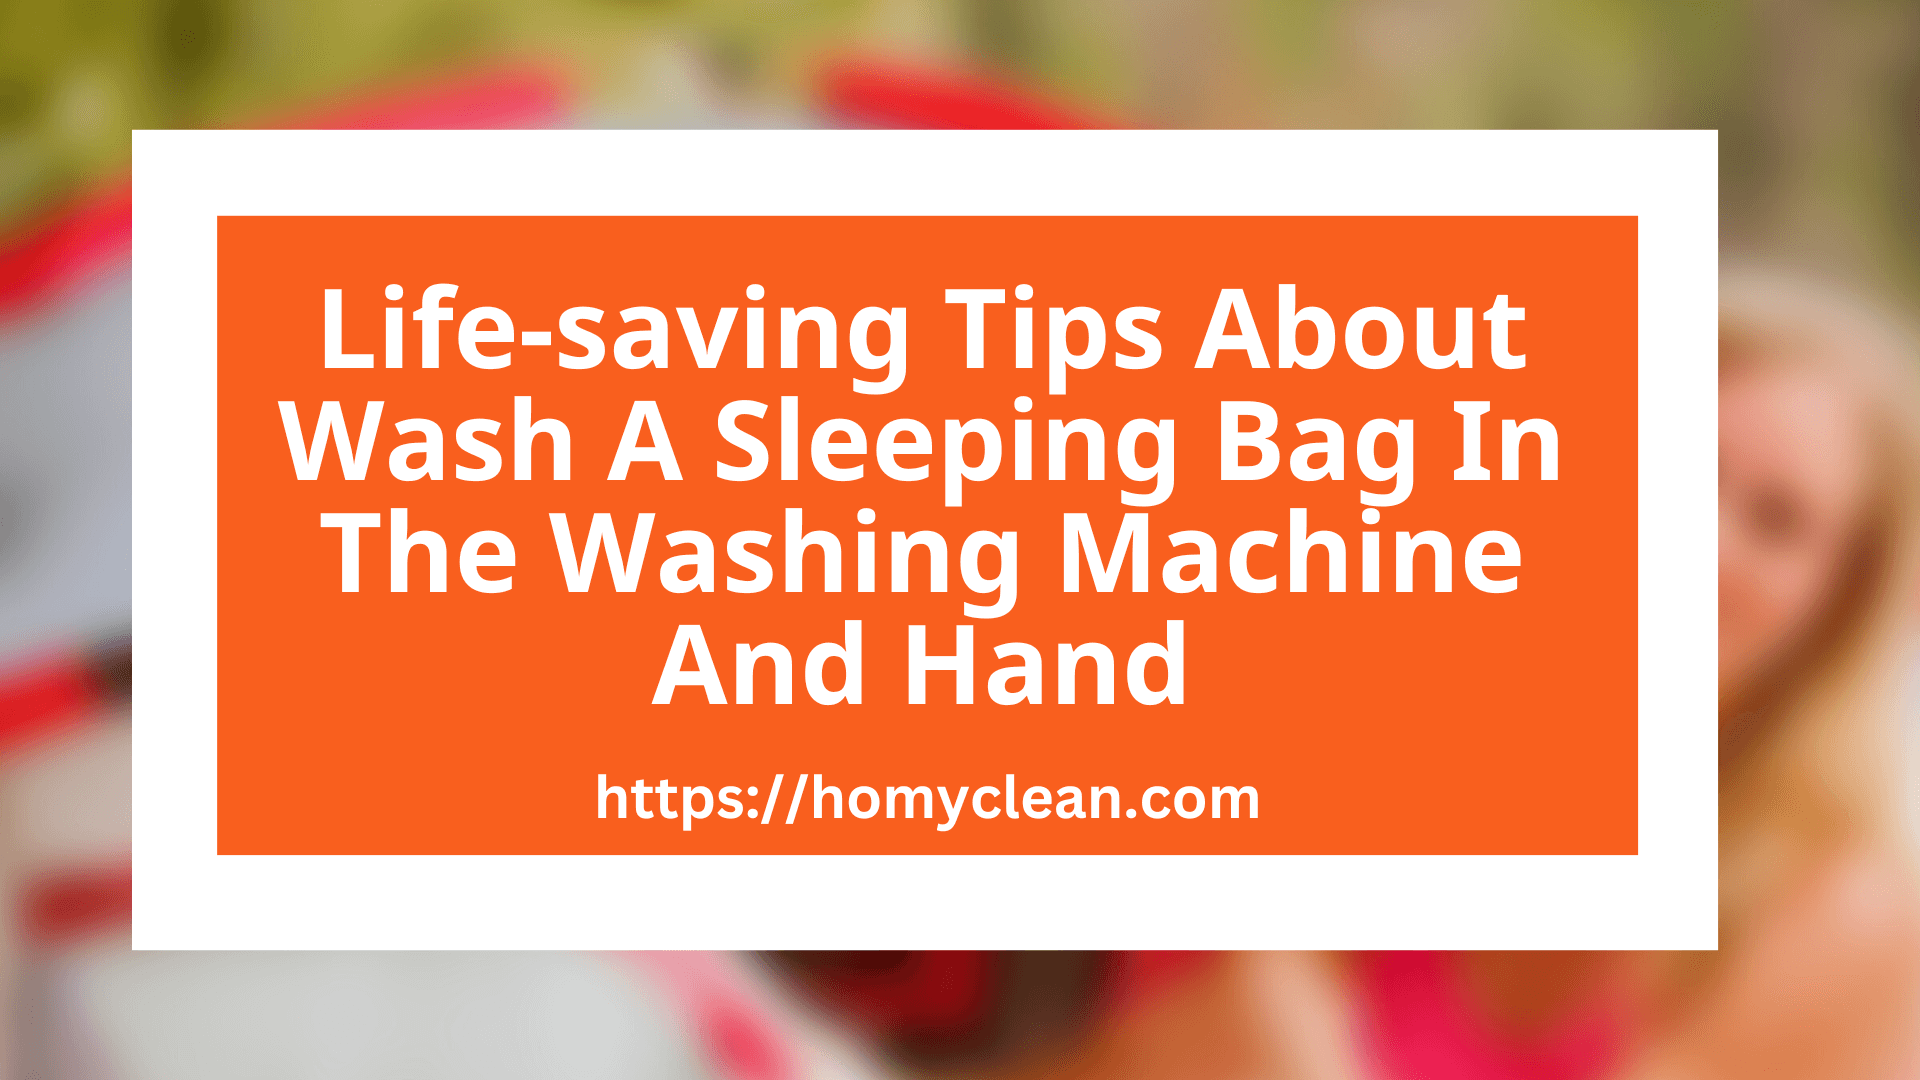 Wash A Sleeping Bag In The Washing Machine And by Hand